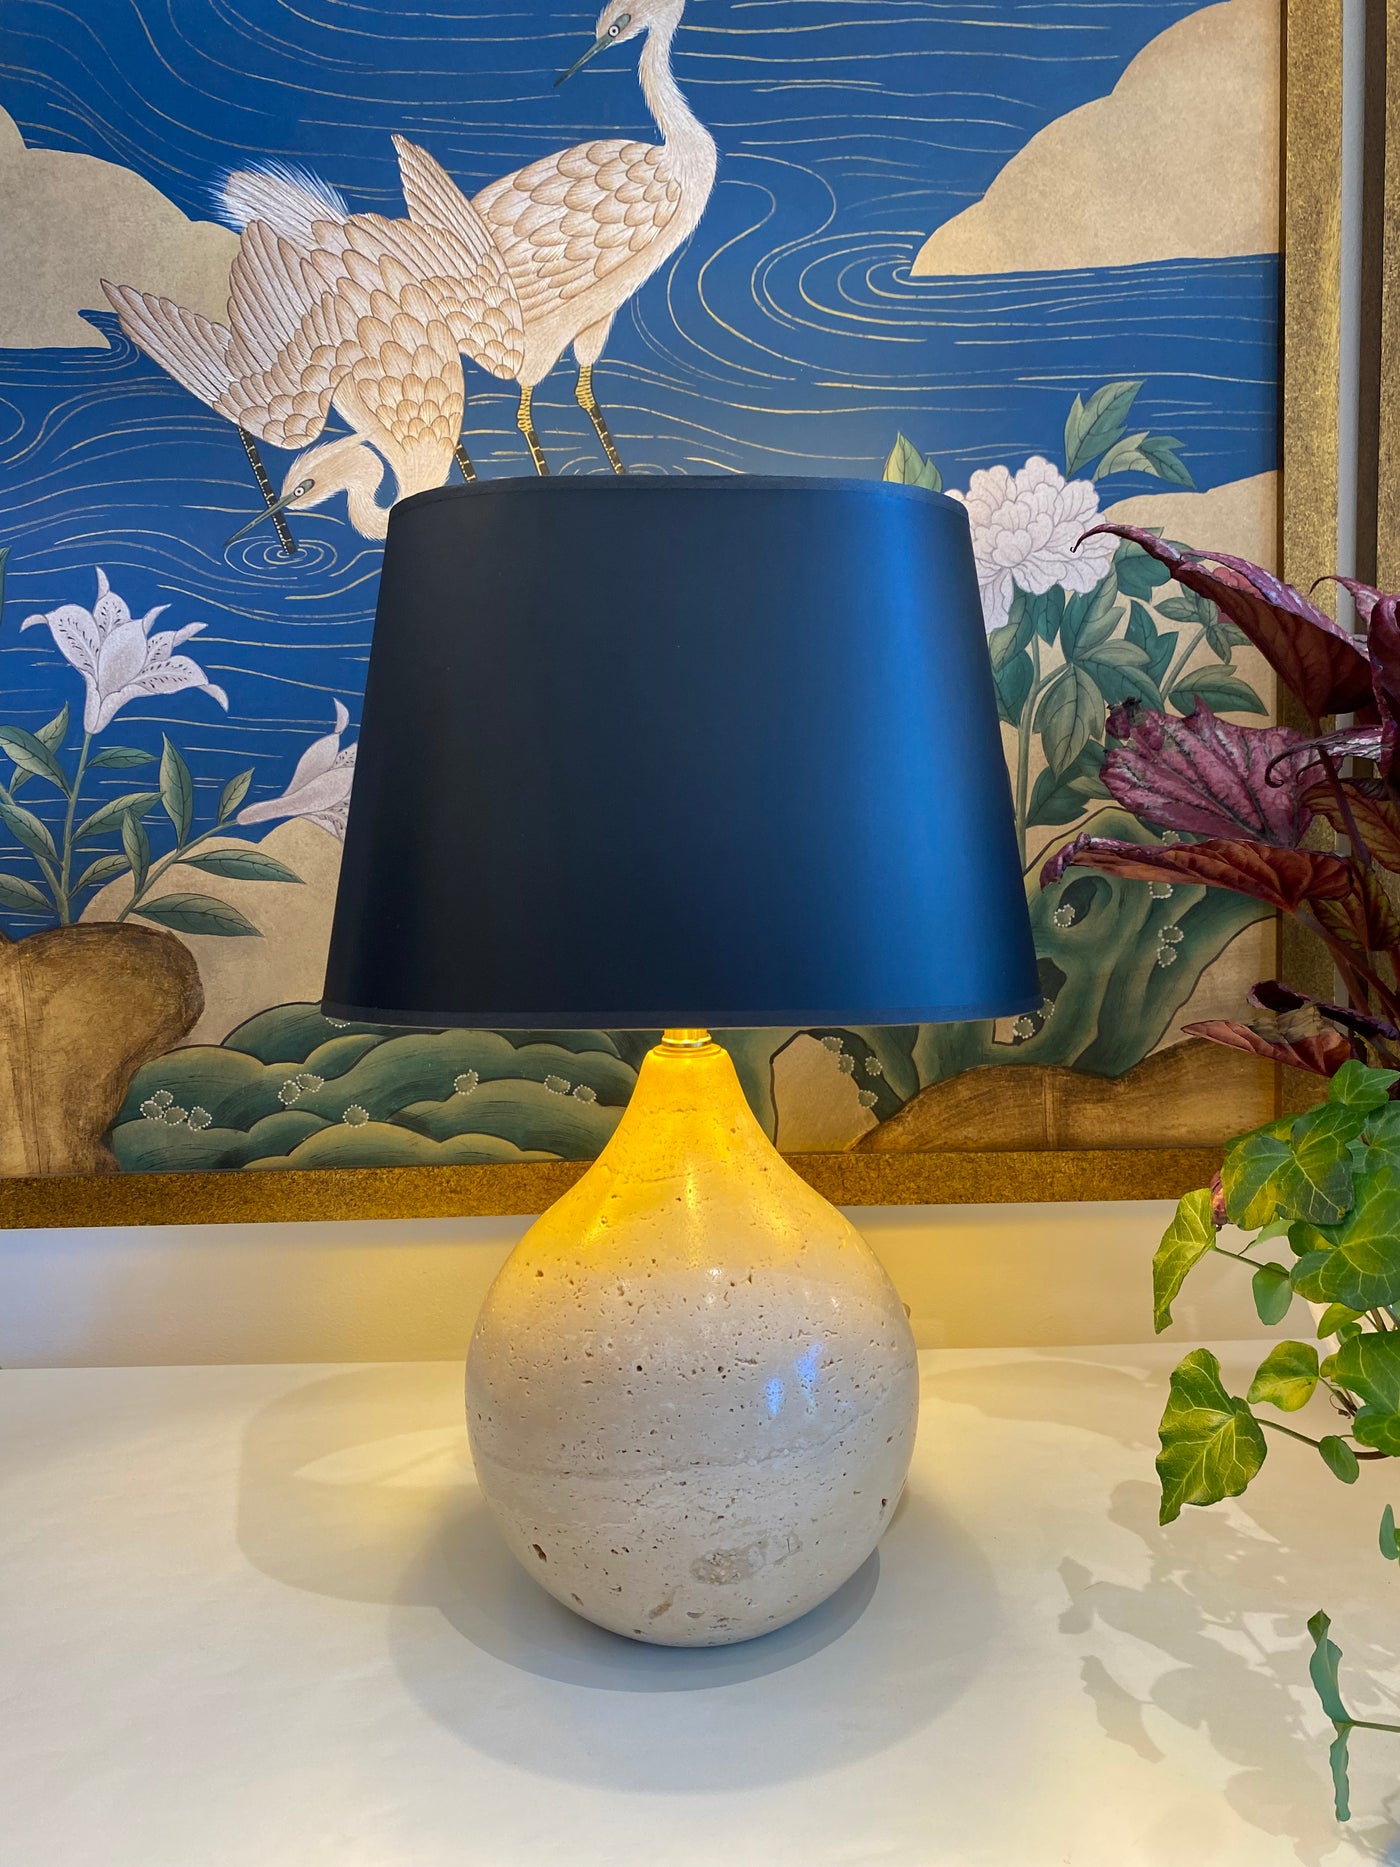 Black oval lampshade on a travertine lamp